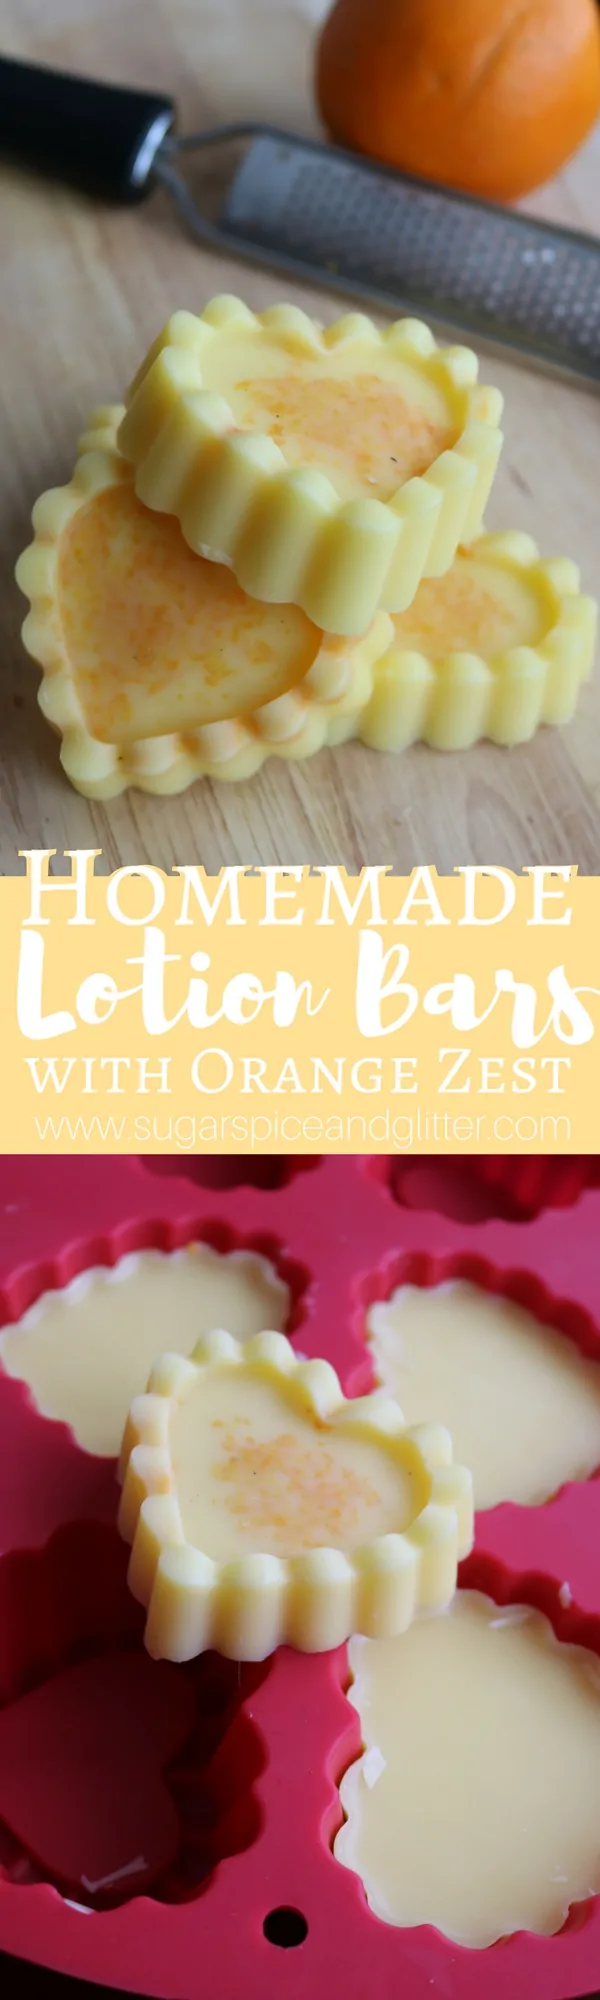 Homemade Lotion Bars with essential oils and fresh orange zest are a great way to moisturize on the go. They are not messy and are perfect for travel or homemade gift giving